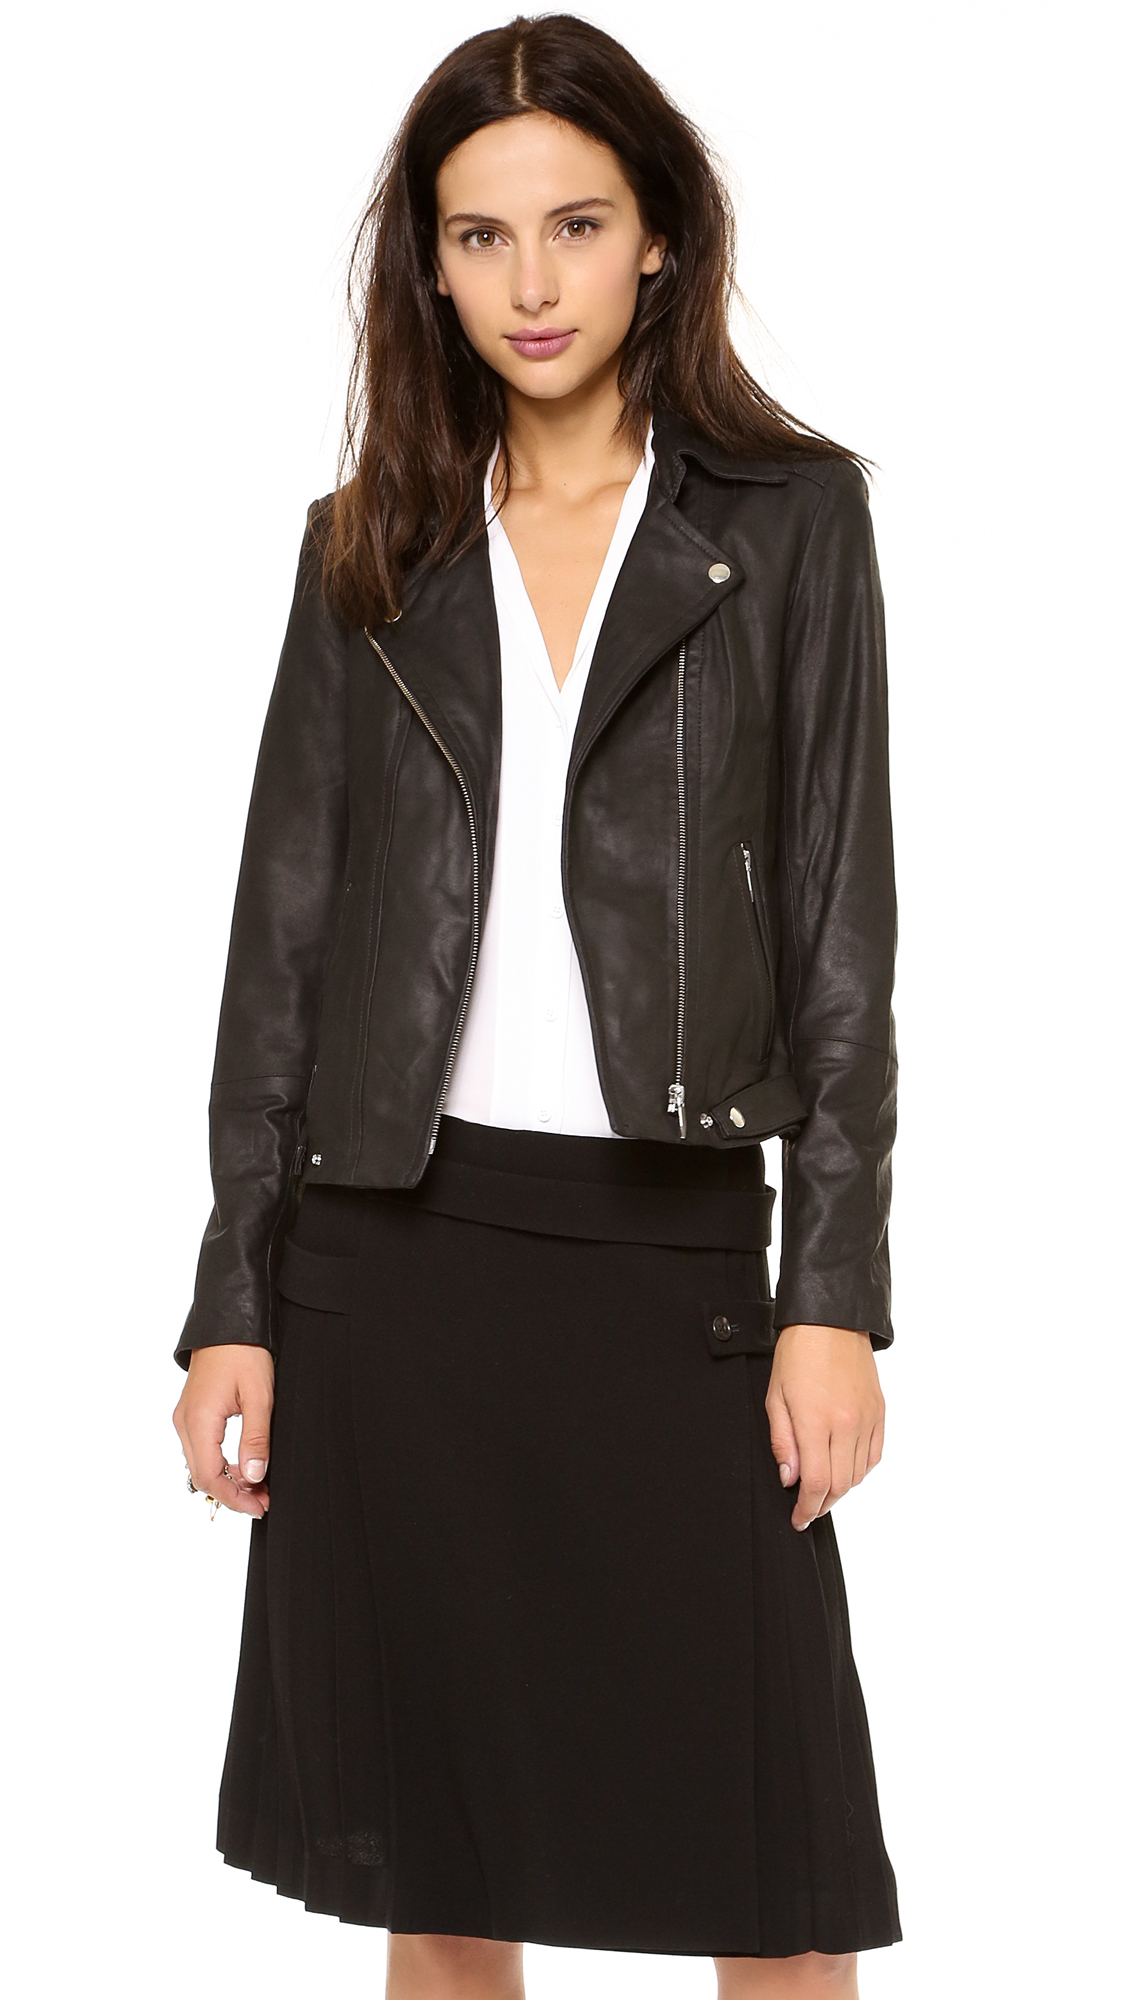 Lyst - Theyskens' theory Jerfect Leather Jacket in Black